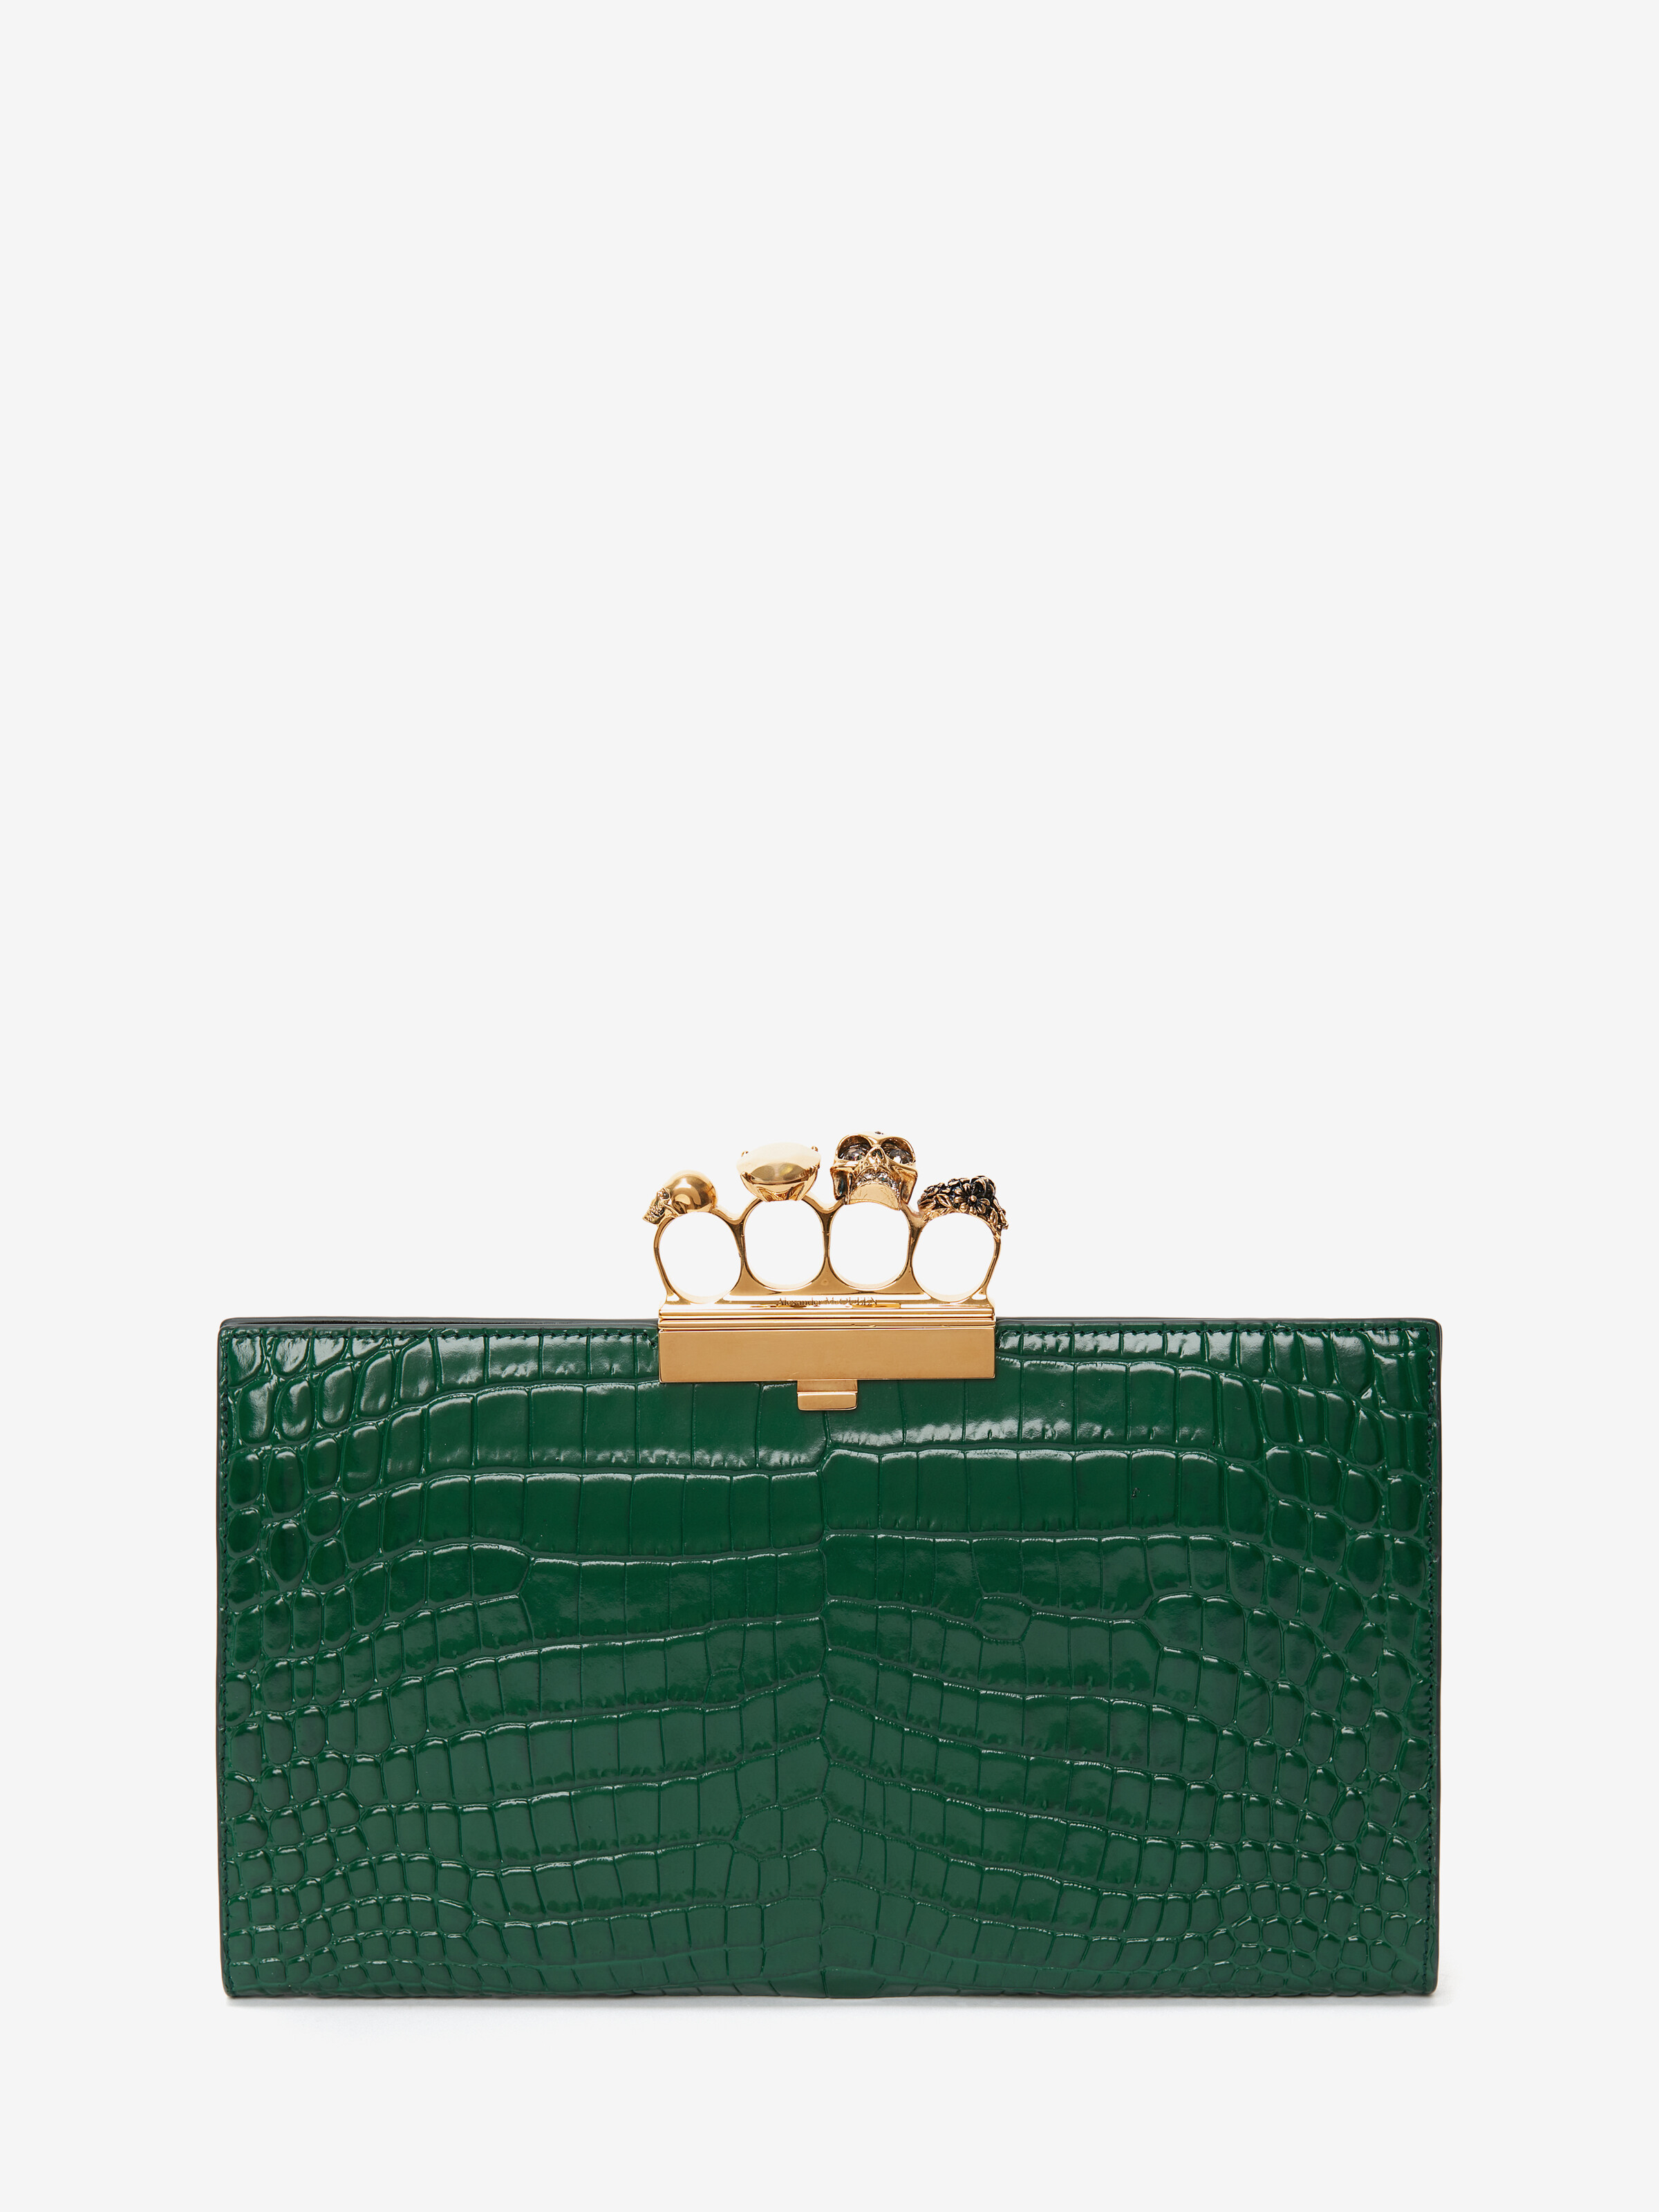 Jewelled Flat Pouch in Emerald